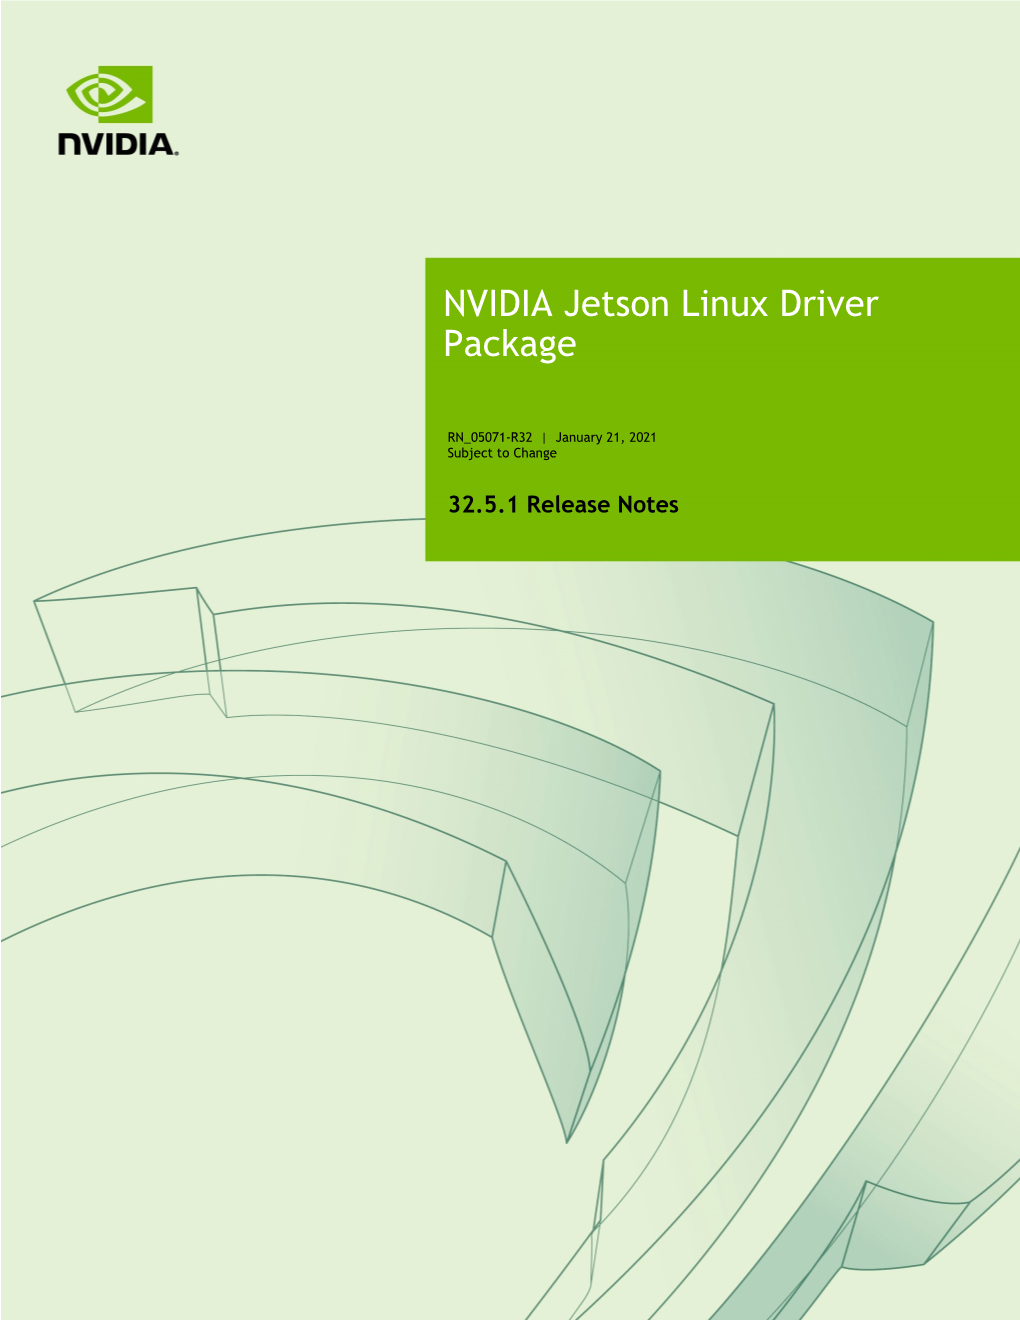 NVIDIA Jetson Linux Driver Package